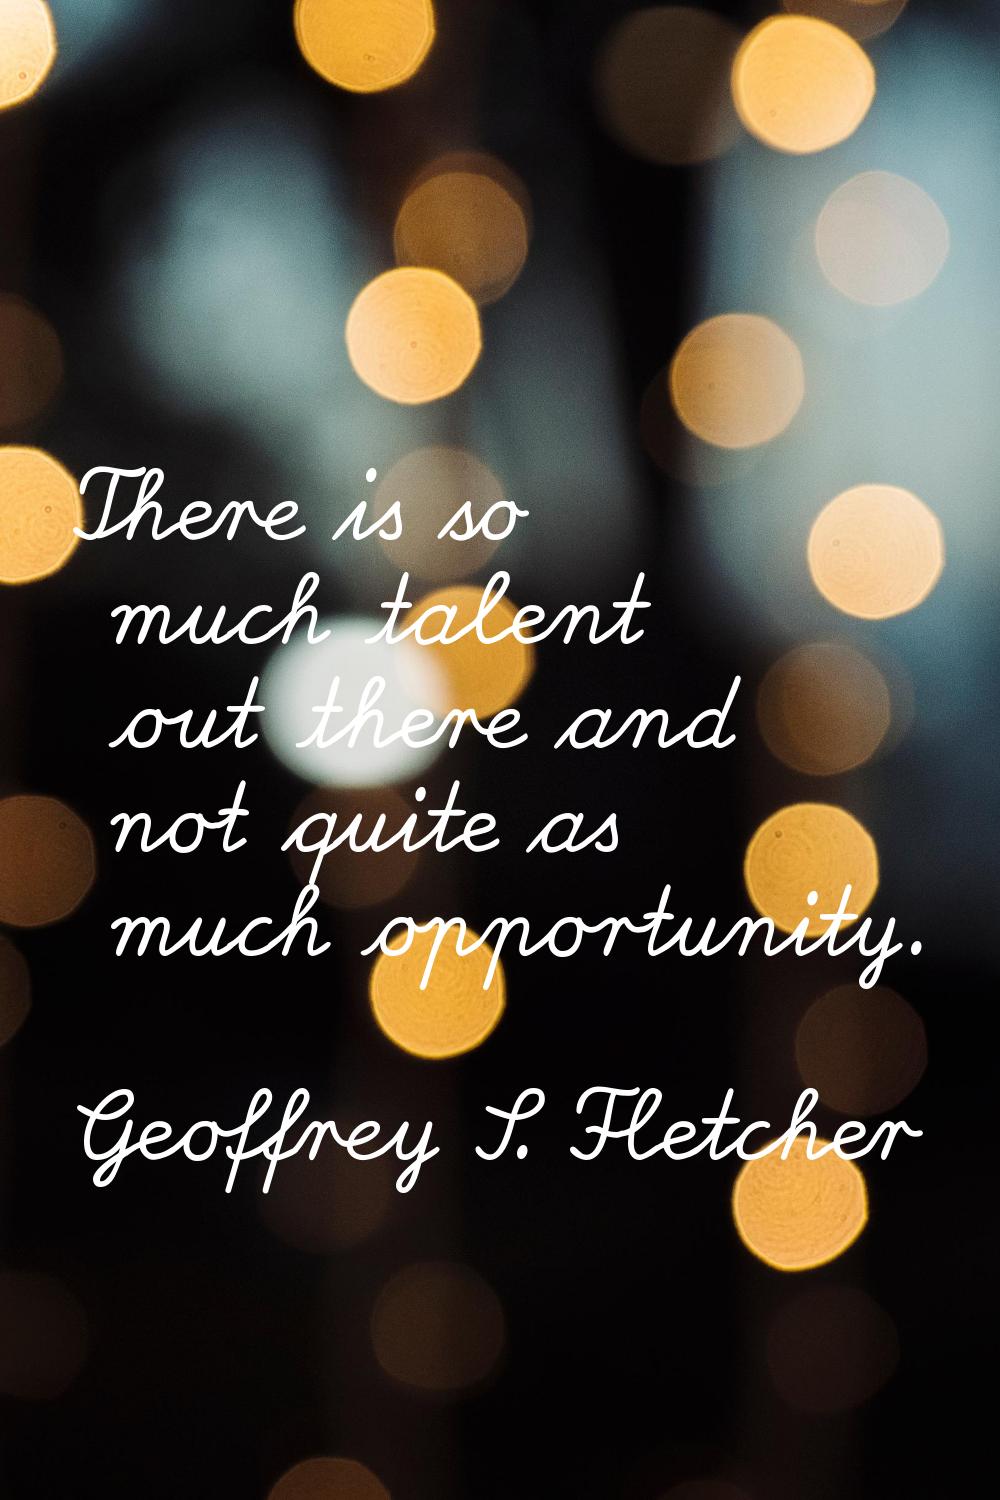 There is so much talent out there and not quite as much opportunity.